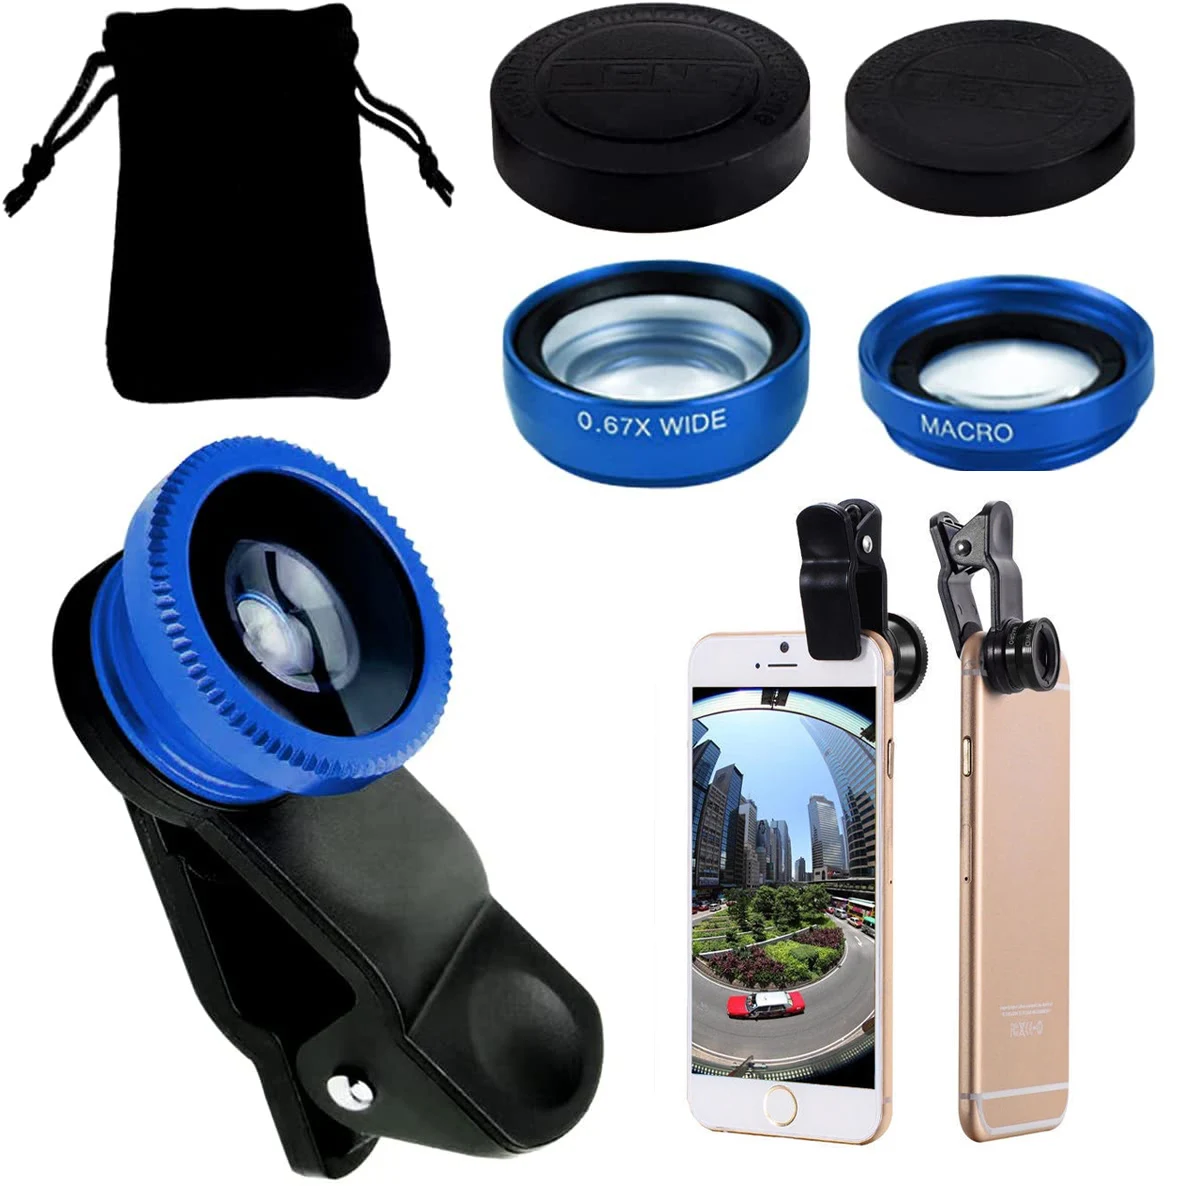 

3in1 Fisheye Mobile Phone Lens 0.67X Wide Angle Zoom Fish Eye Macro Lenses Camera Kits With Clip Lens For Iphone Smartphone